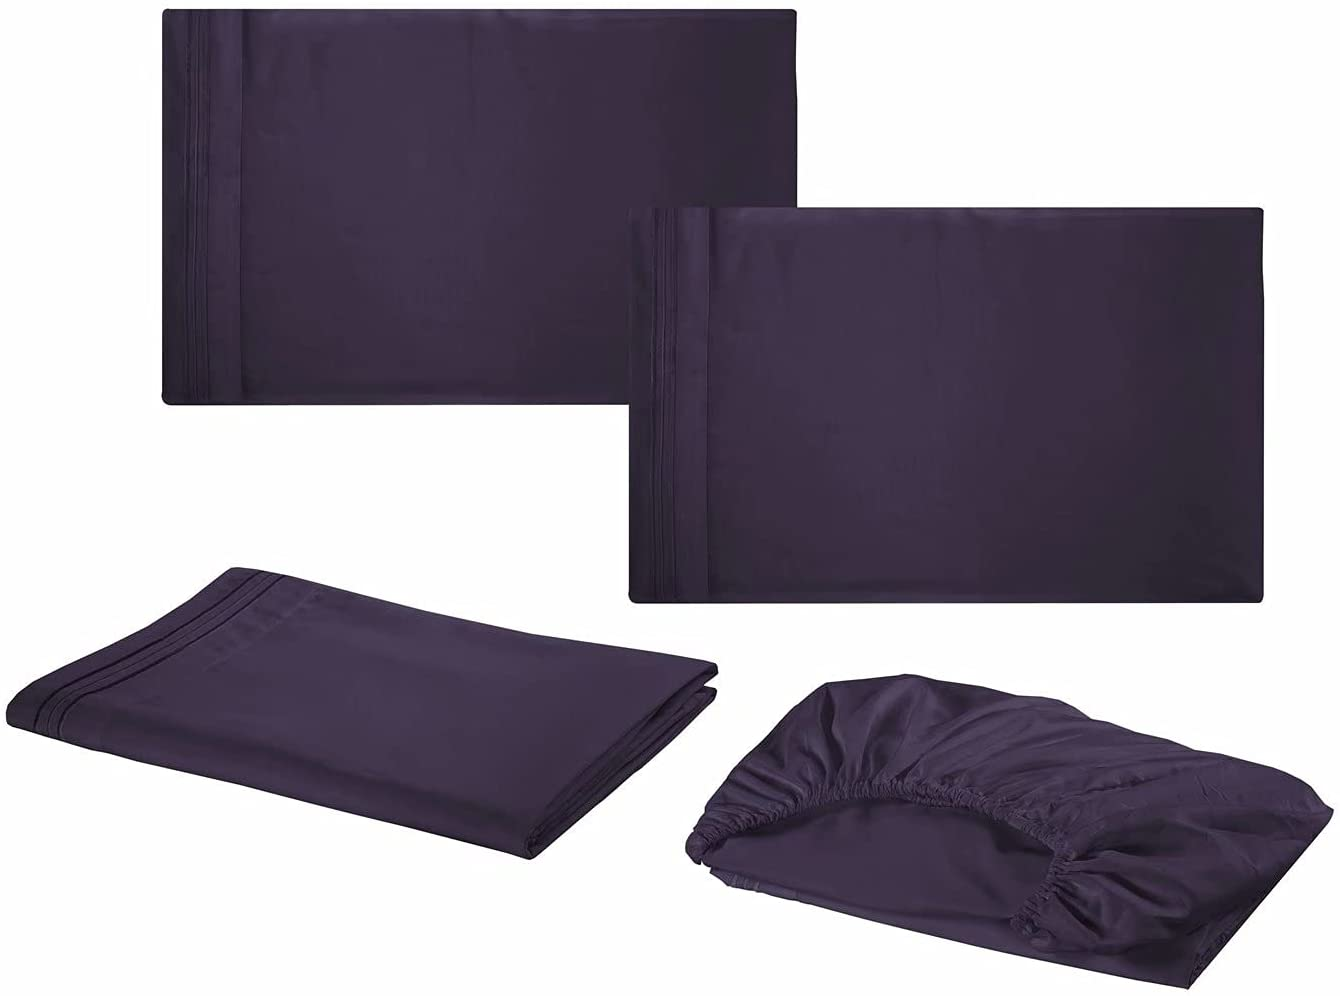 Bed Sheet Set 4 Piece Extra Soft Luxury Brushed Microfiber 1800 Thread Count with Deep Pockets